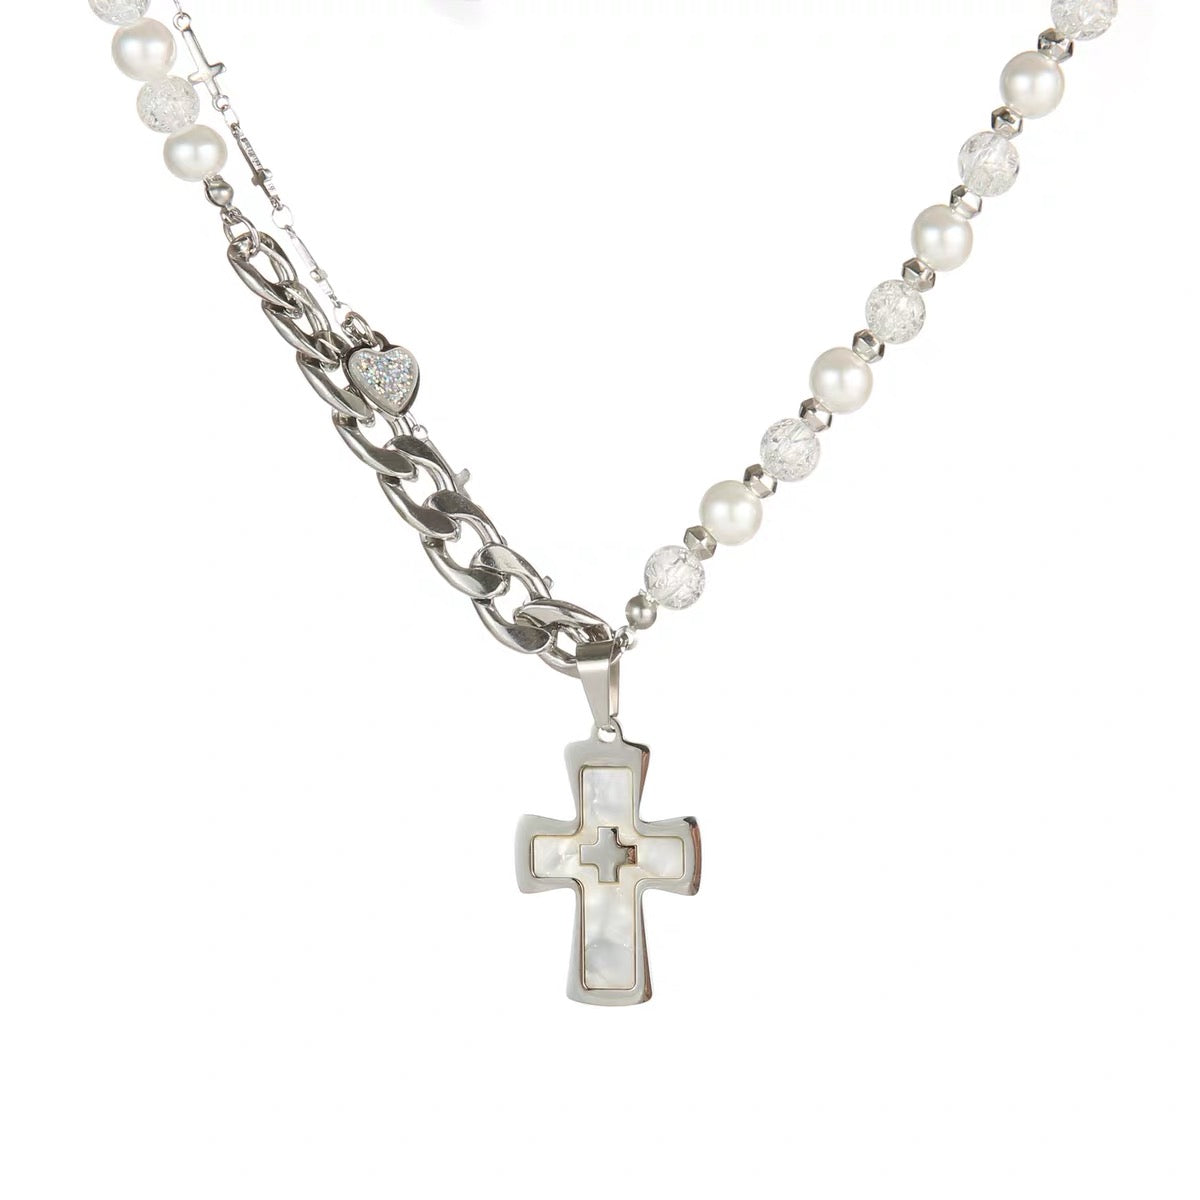 METAL BAKER - Spice Girl Personality Cross Necklace